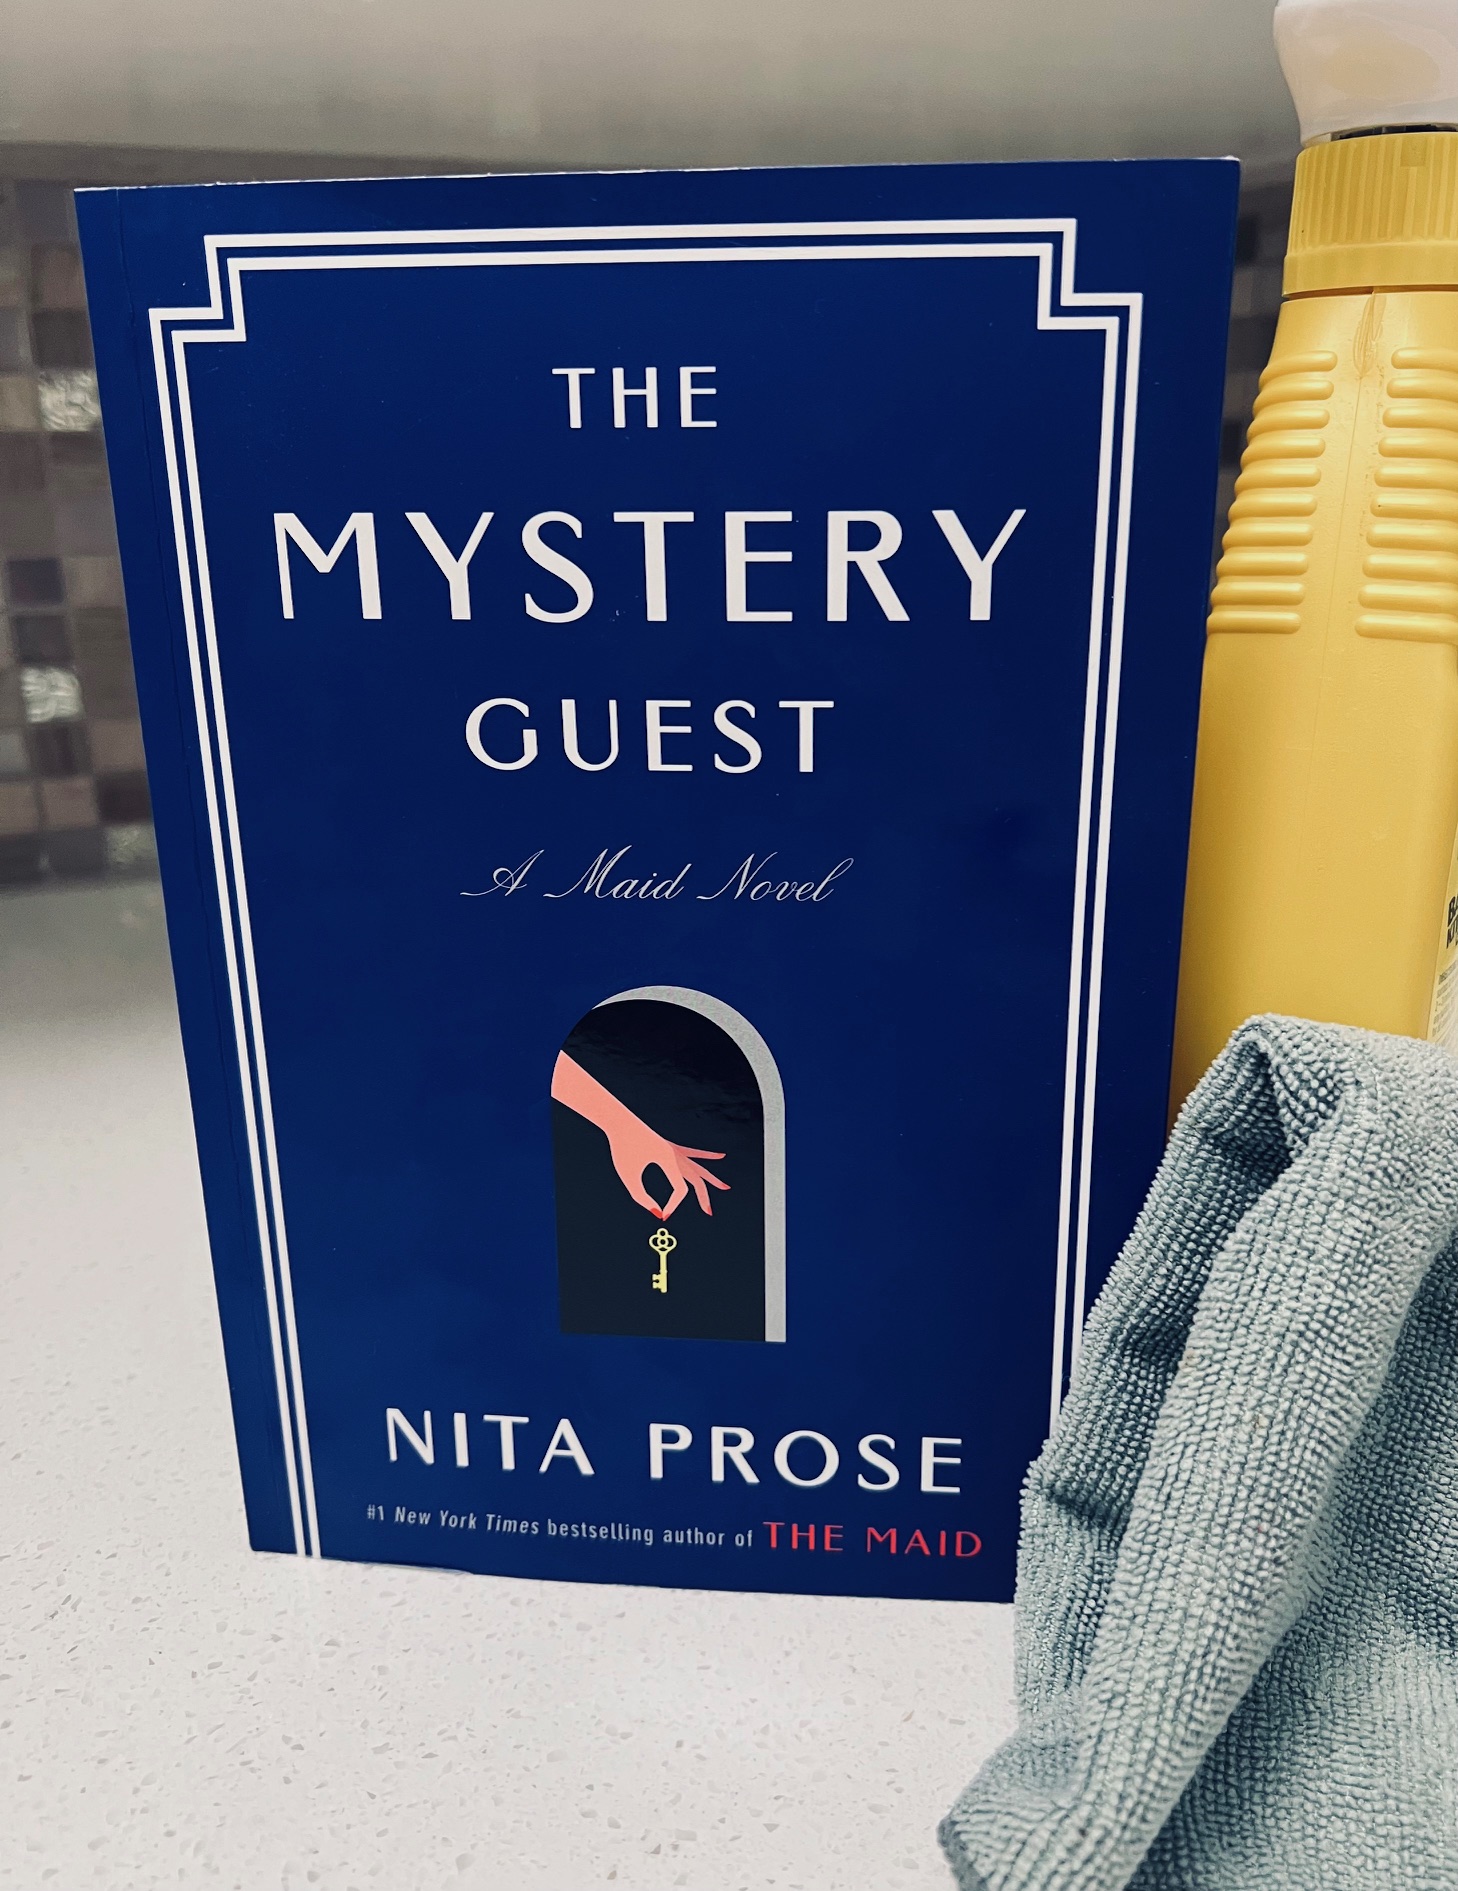 The Mystery Guest by Nita Prose book